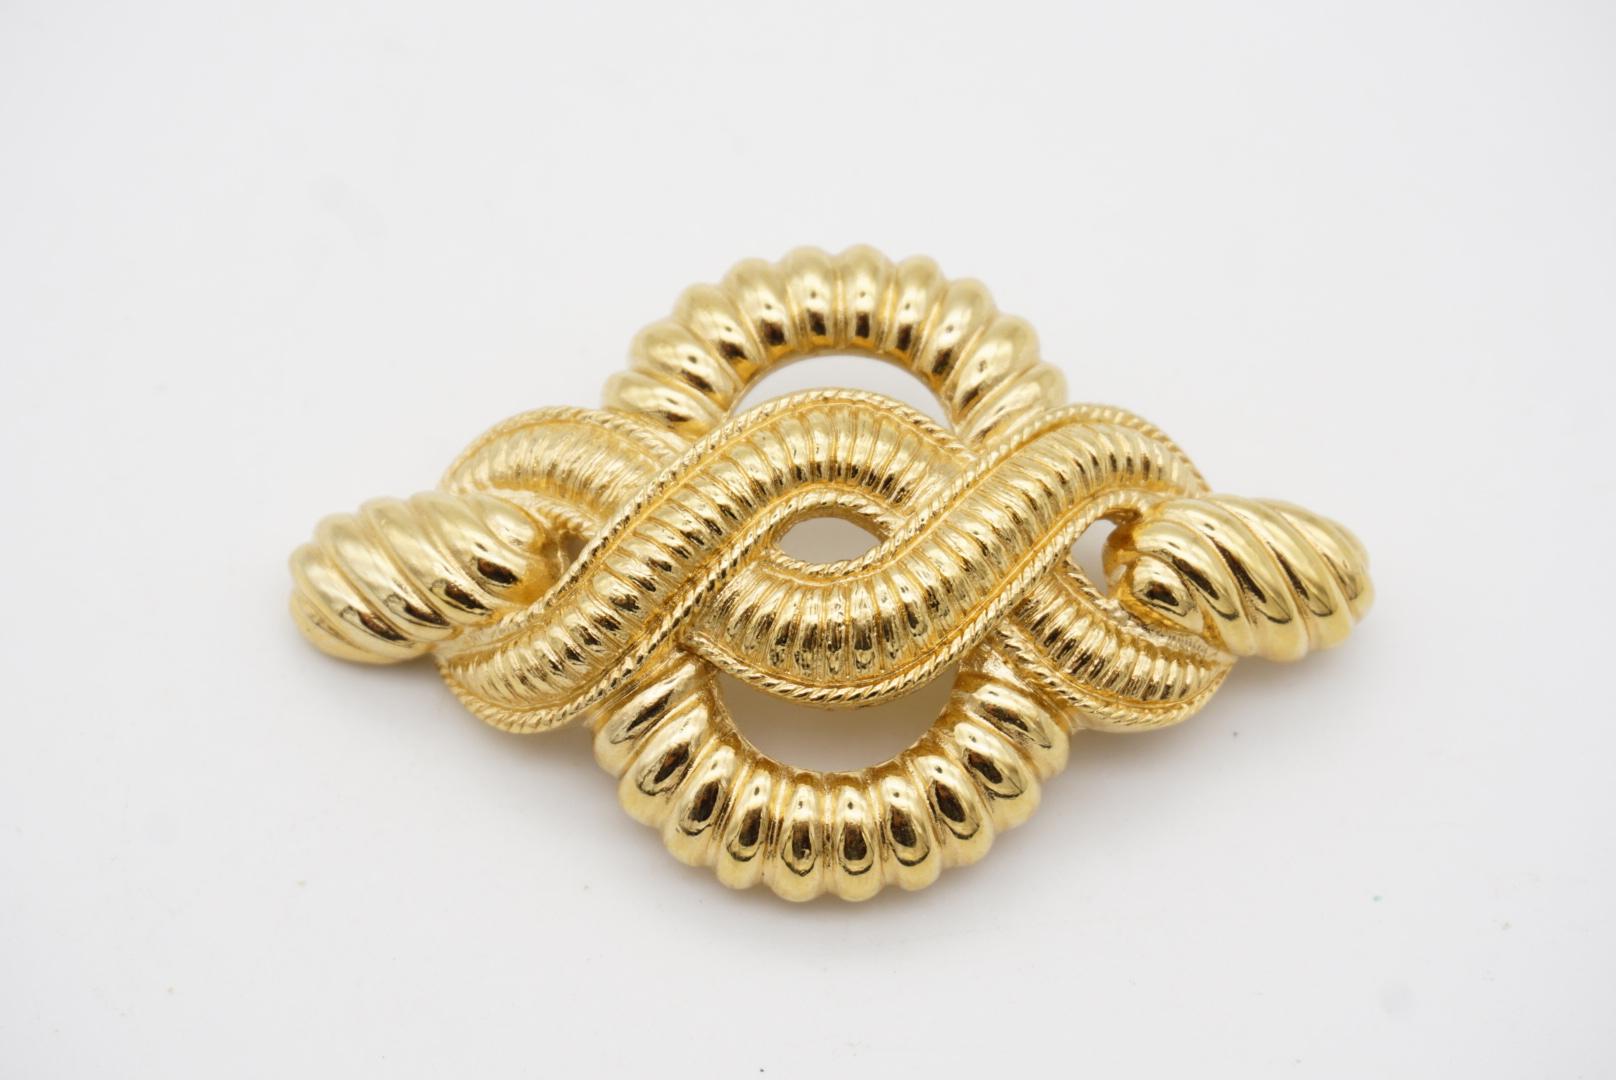 Christian Dior 1980s Vintage Large Textured Interlocked Rope Twist Knot Brooch For Sale 4